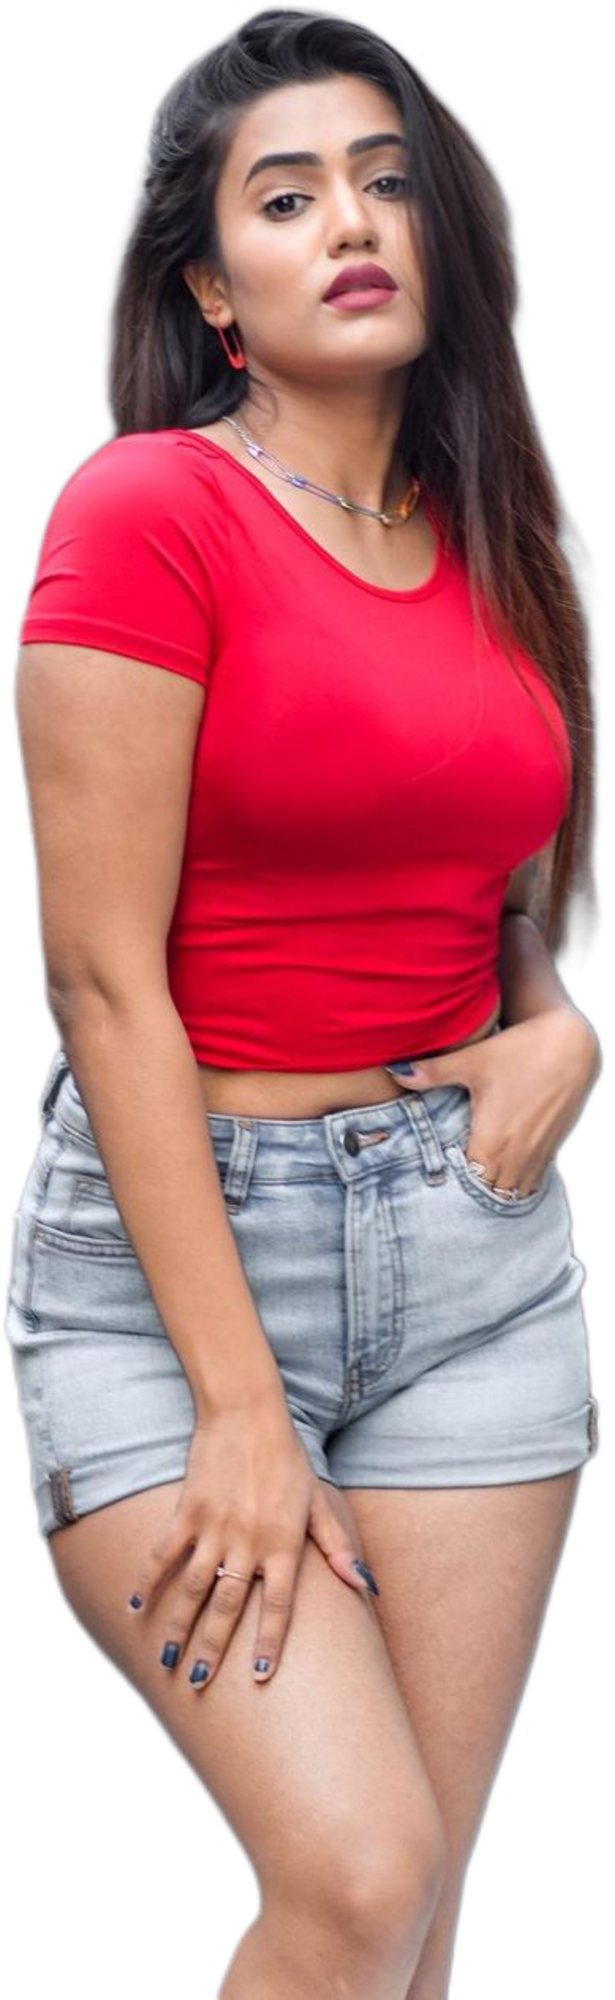 🔥 Girl In Red Tshirt Png Images Download Cbeditz